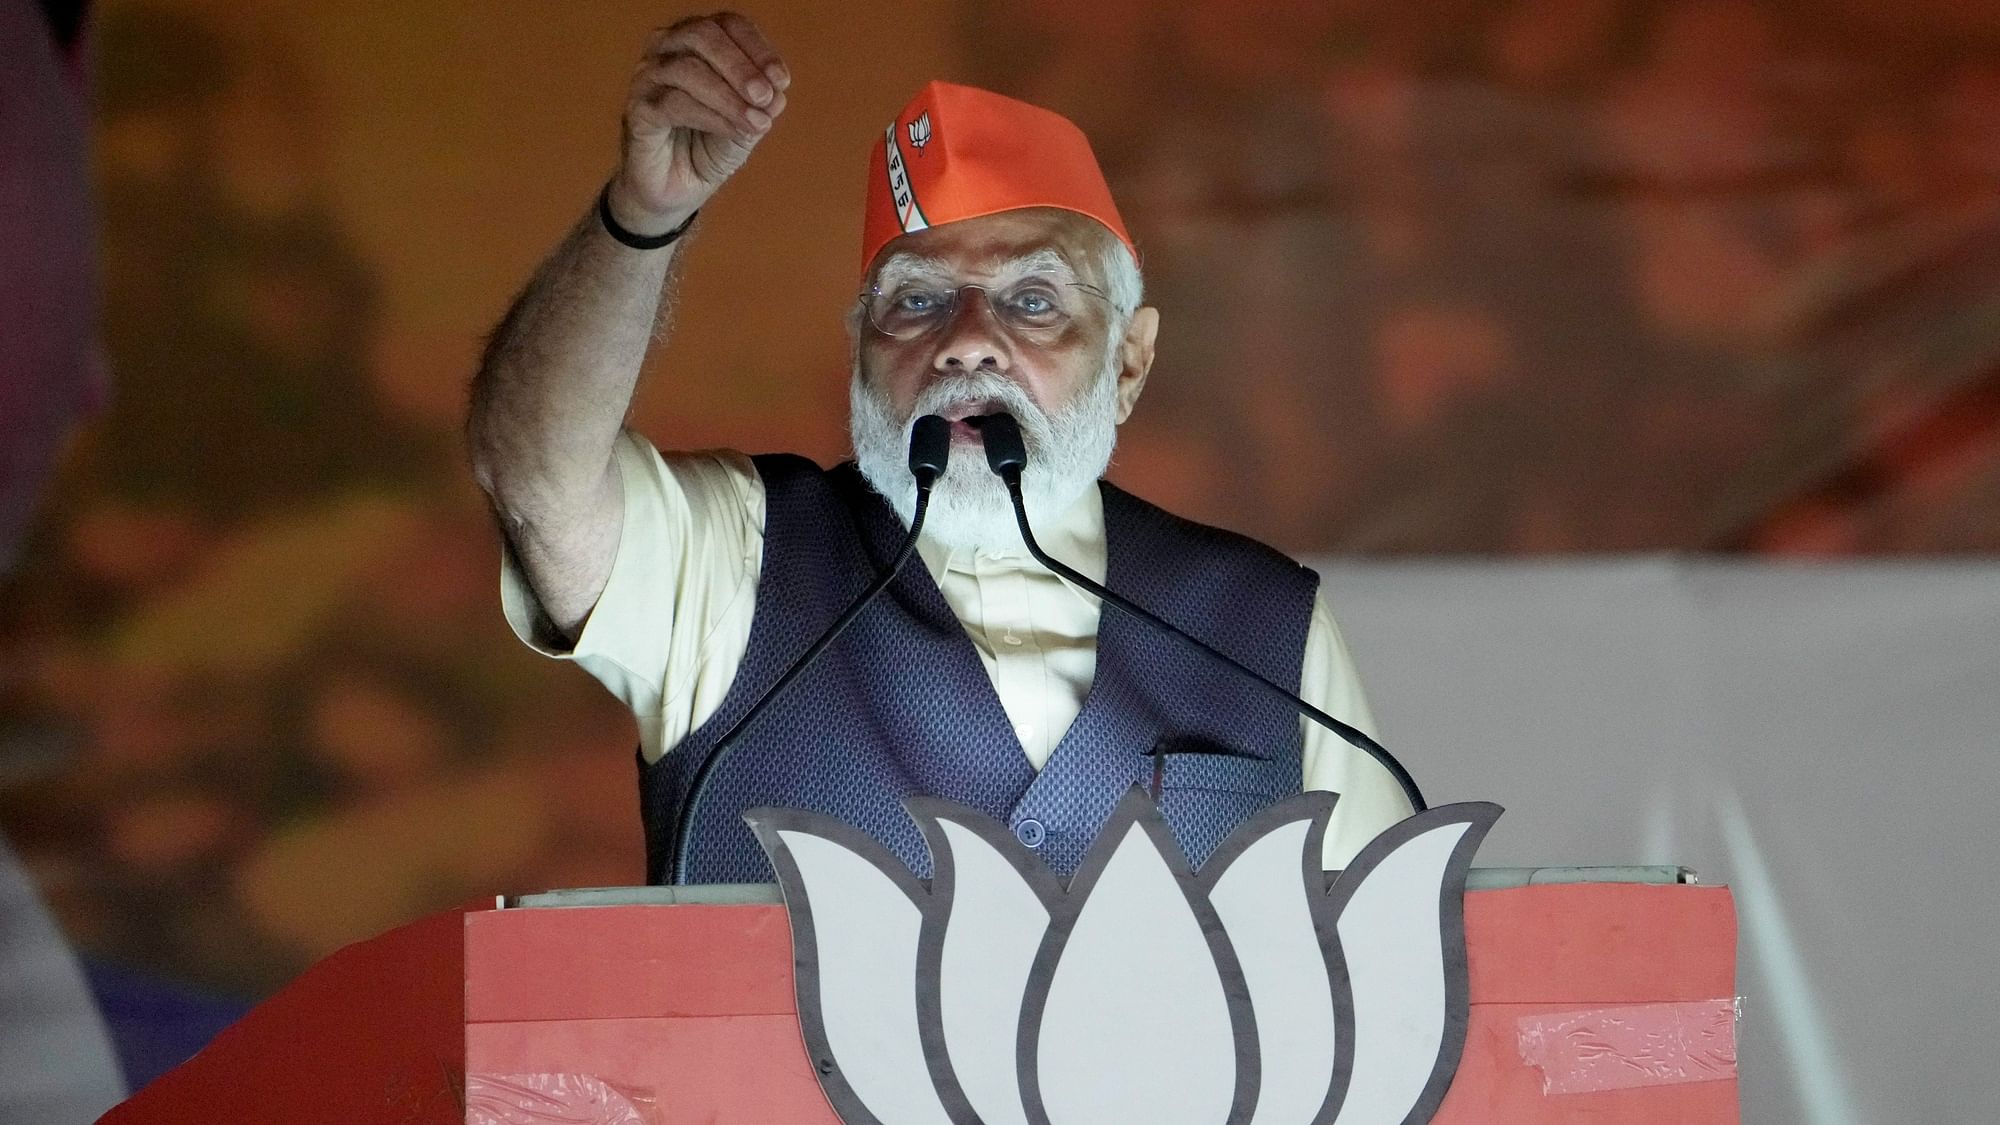 <div class="paragraphs"><p>When Prime Minister Narendra Modi held a rally in Siliguri recently, Leader of Opposition in West Bengal, Suvendu Adhikari, said that North Bengal has always been "the Prime Minister's bastion".</p></div>